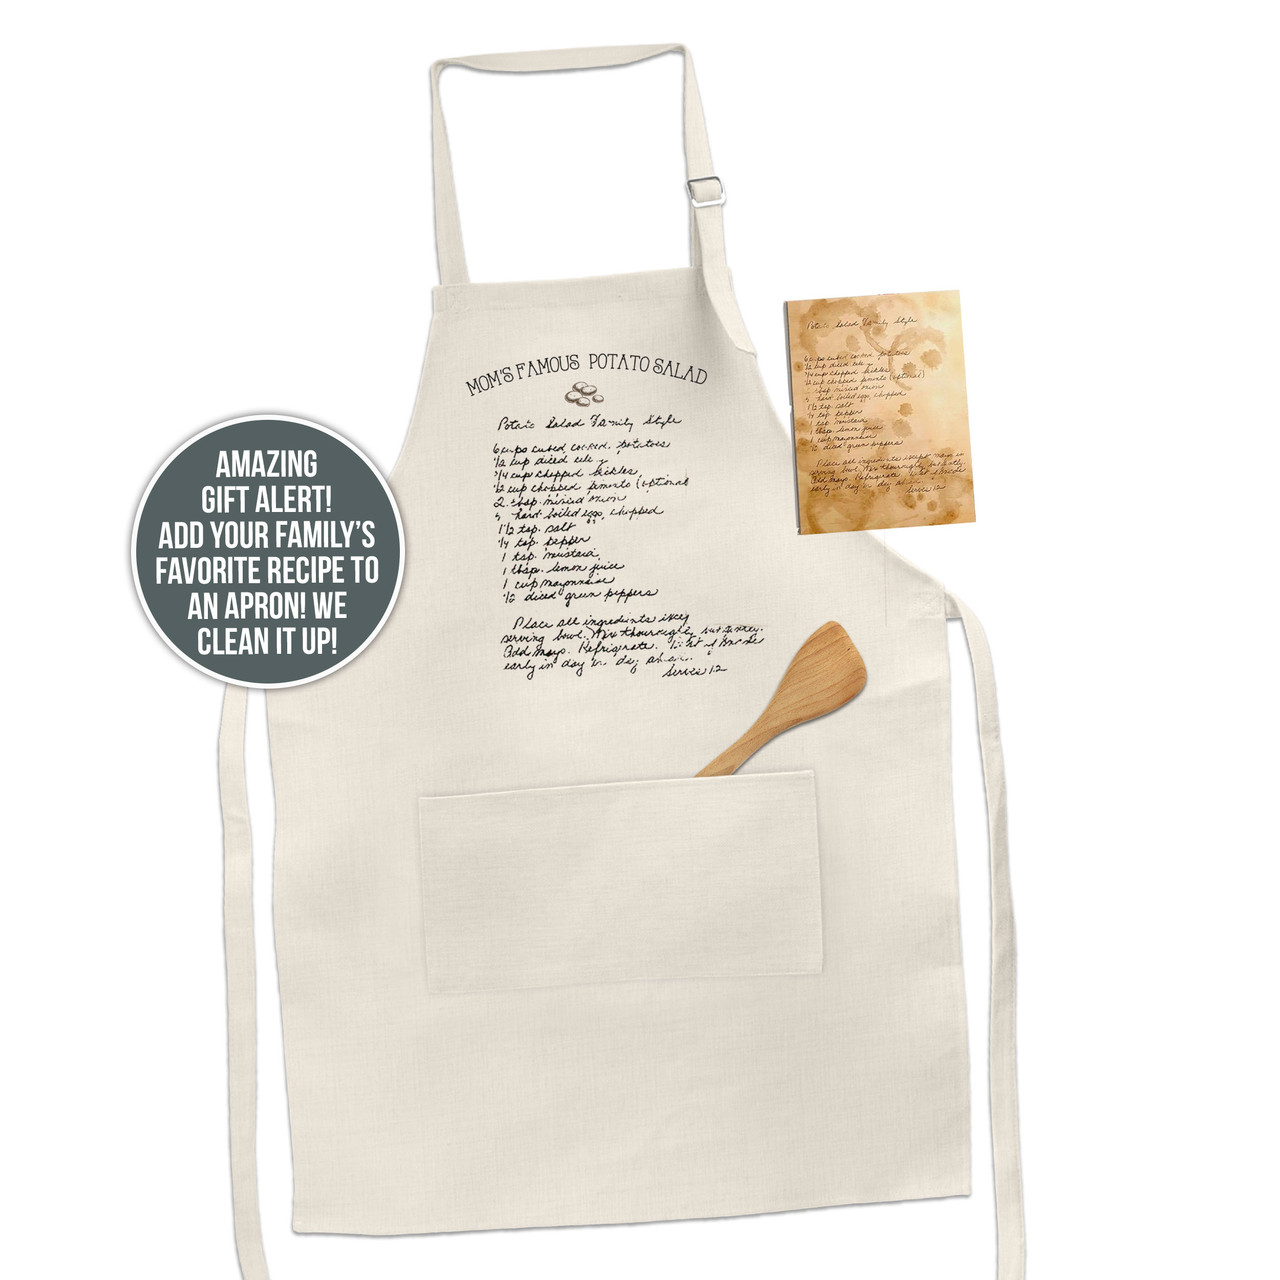 https://cdn11.bigcommerce.com/s-6a772/images/stencil/1280x1280/products/3556/82618/apron-001--2__10511.1644612547.jpg?c=2?imbypass=on